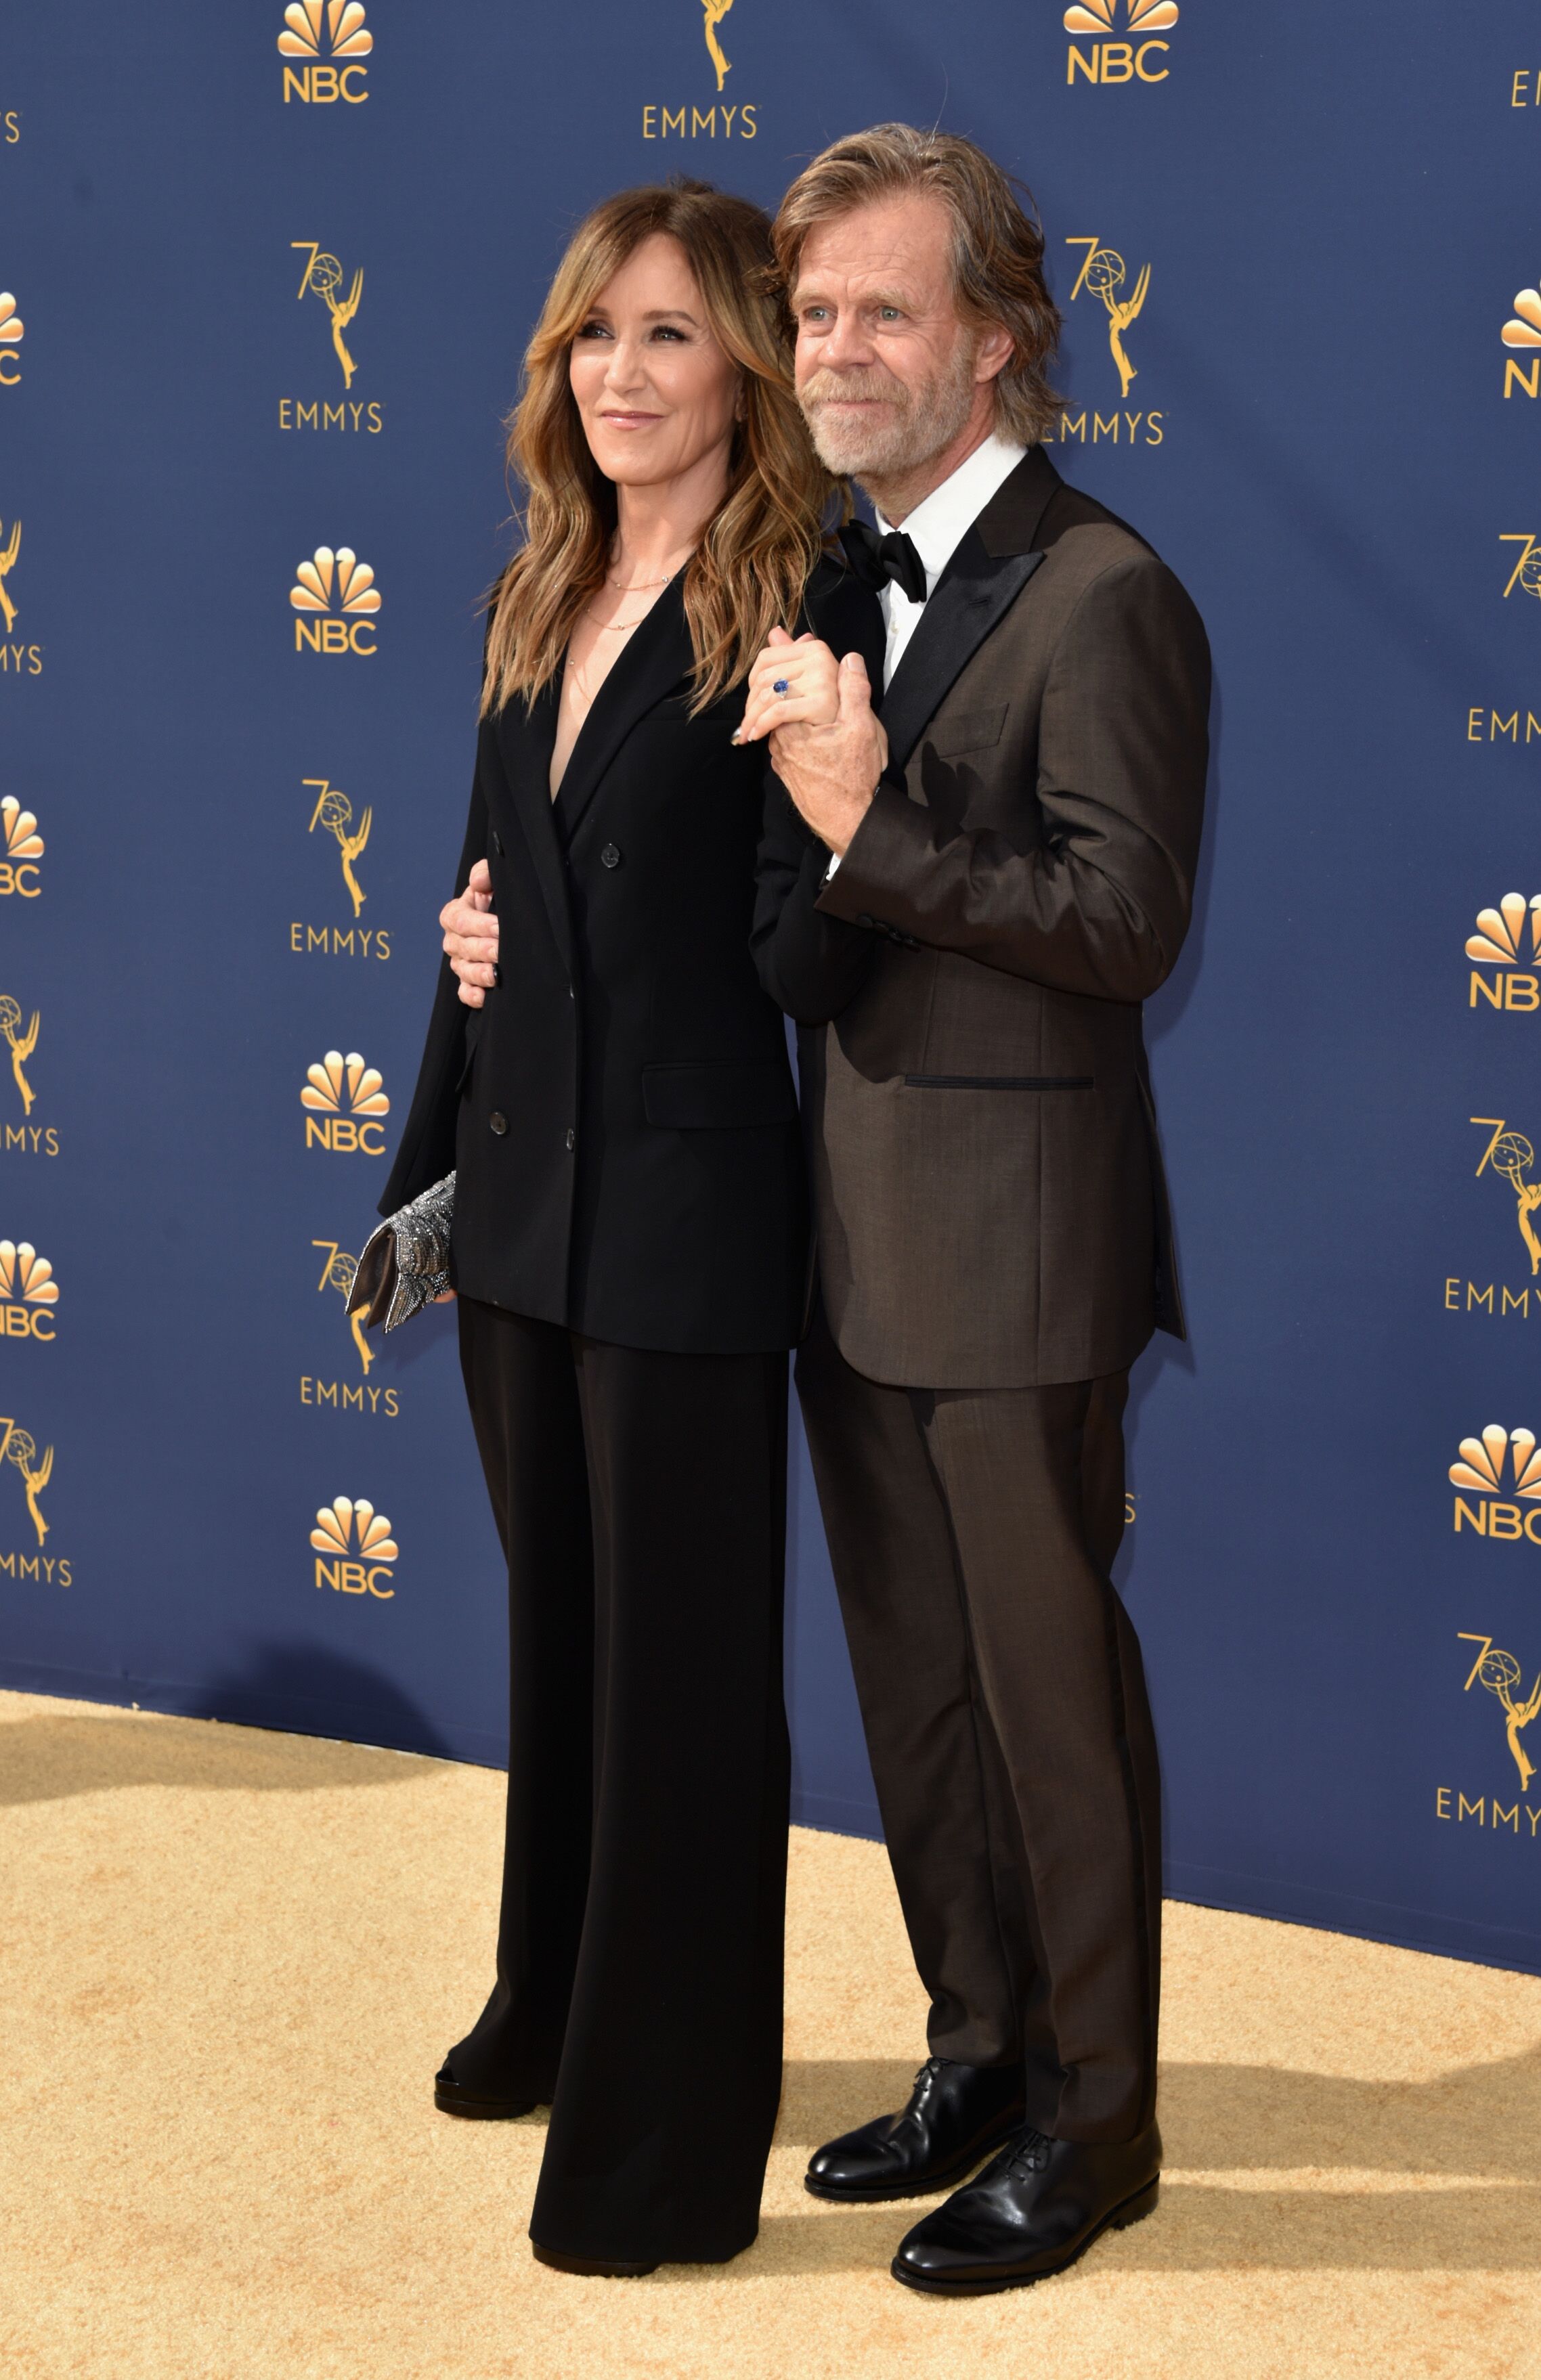 Felicity Huffman and William H. Macy at the 70th Emmy Awards on September 17, 2018, in Los Angeles, California | Photo: John Shearer/Getty Images